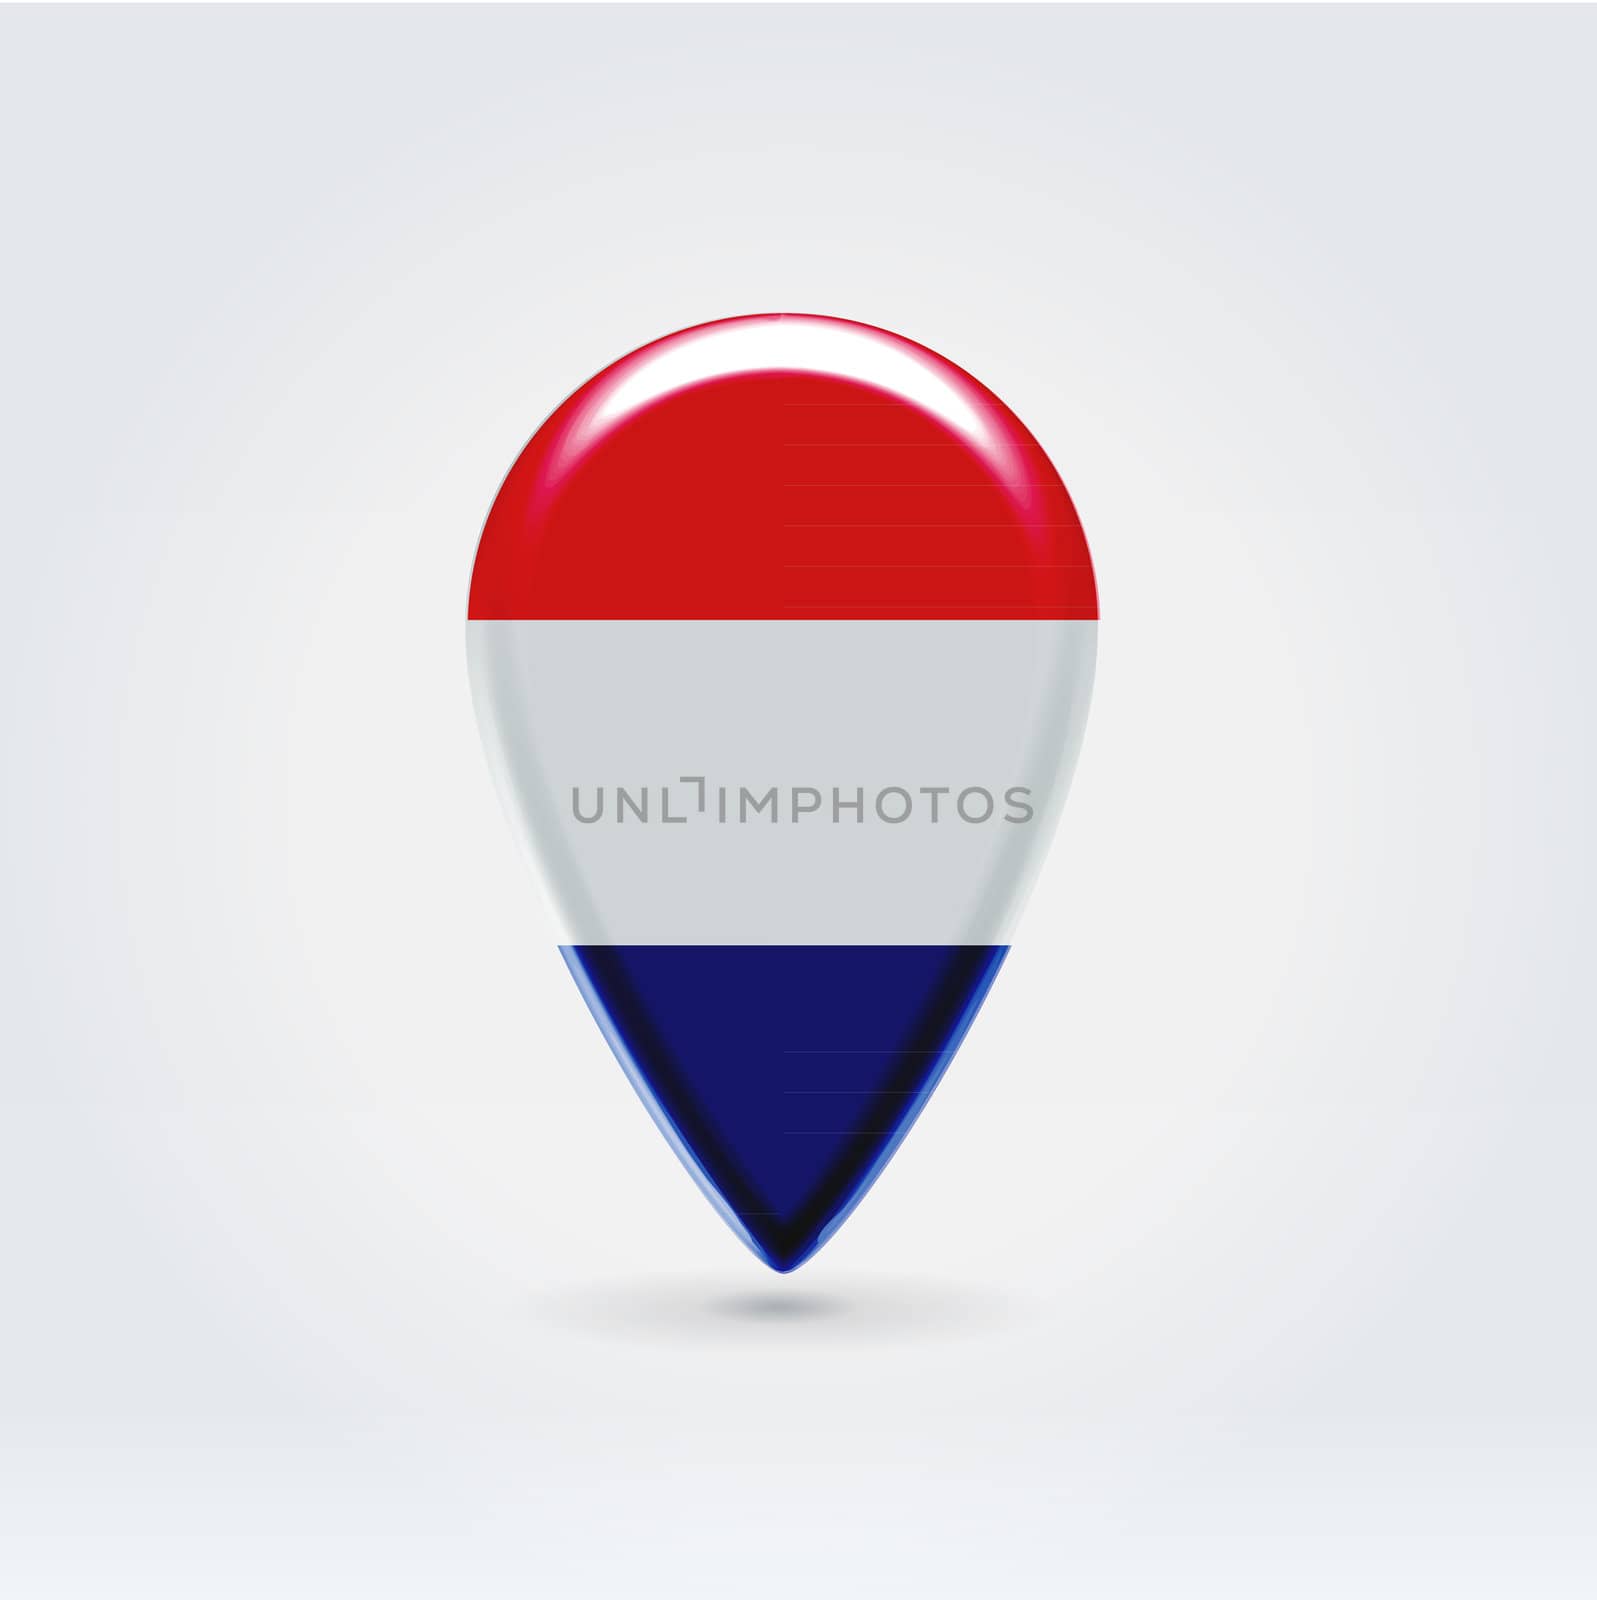 Glossy colorful Netherlands map application point label symbol hanging over enlighted background